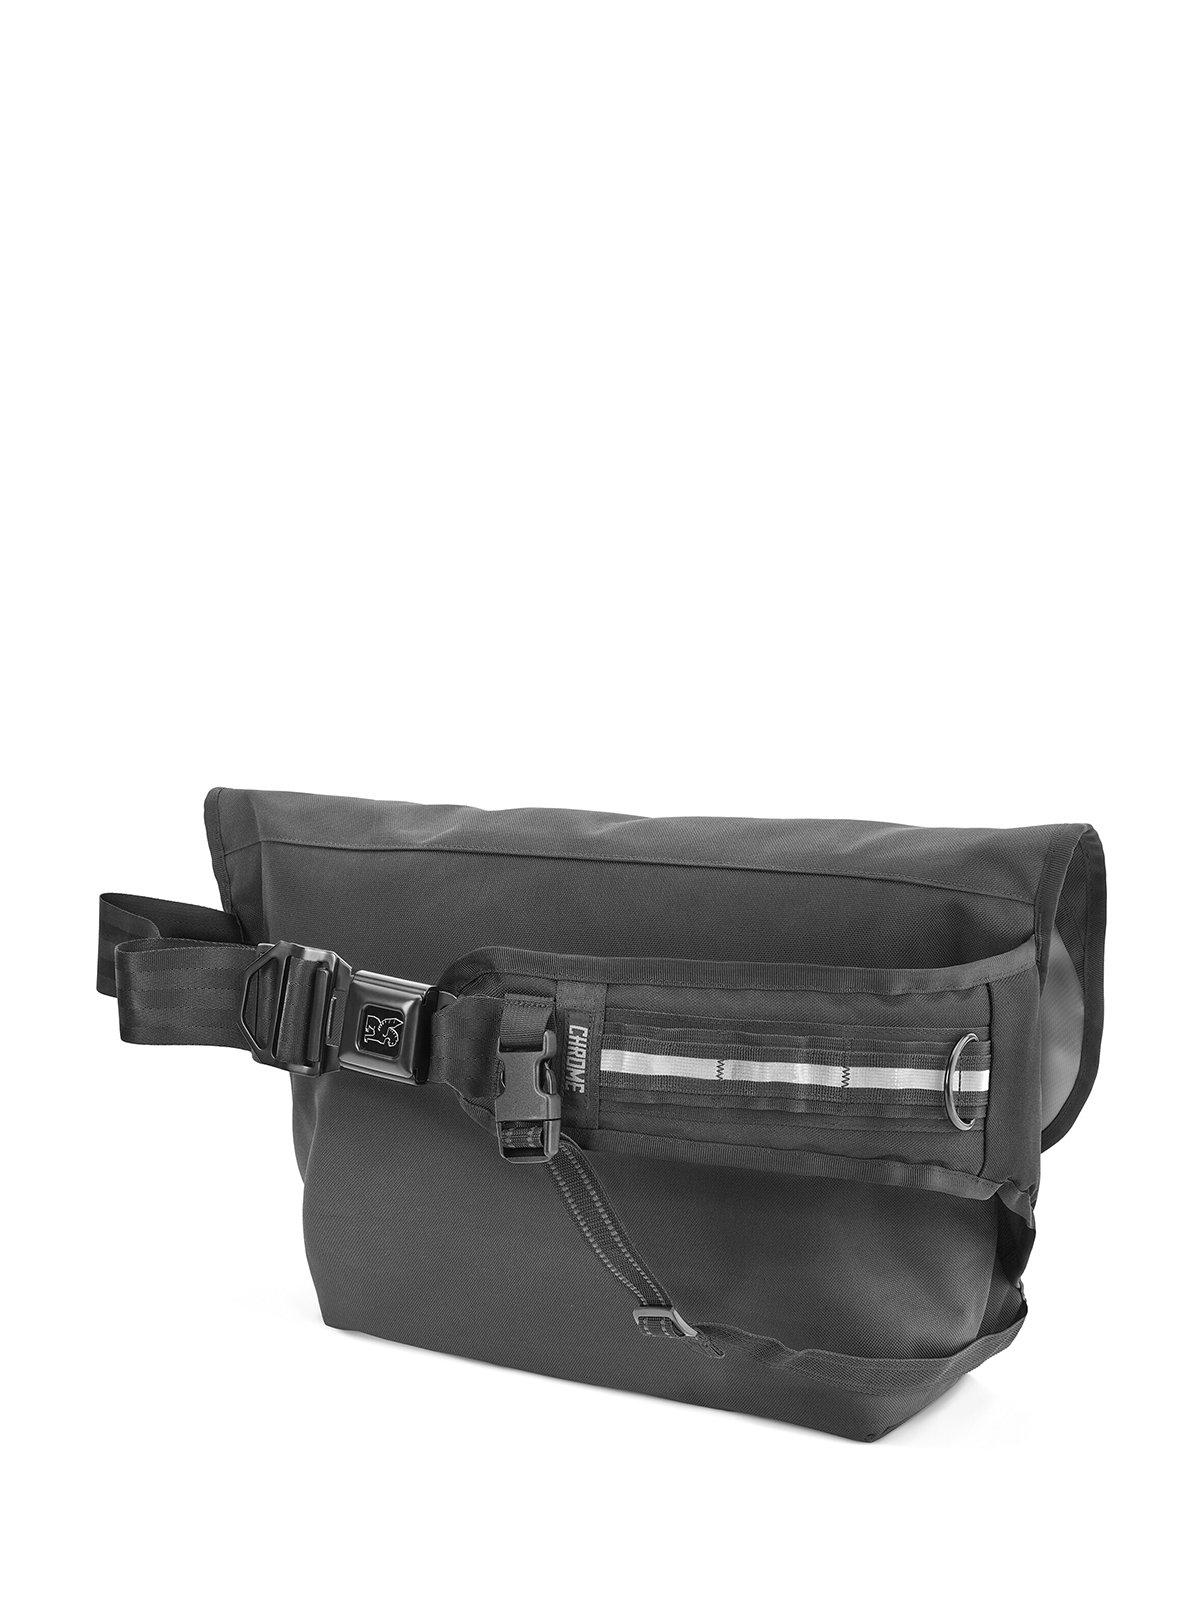 Chrome Industries Citizen Messenger Bag All Black - MORE by Morello Indonesia